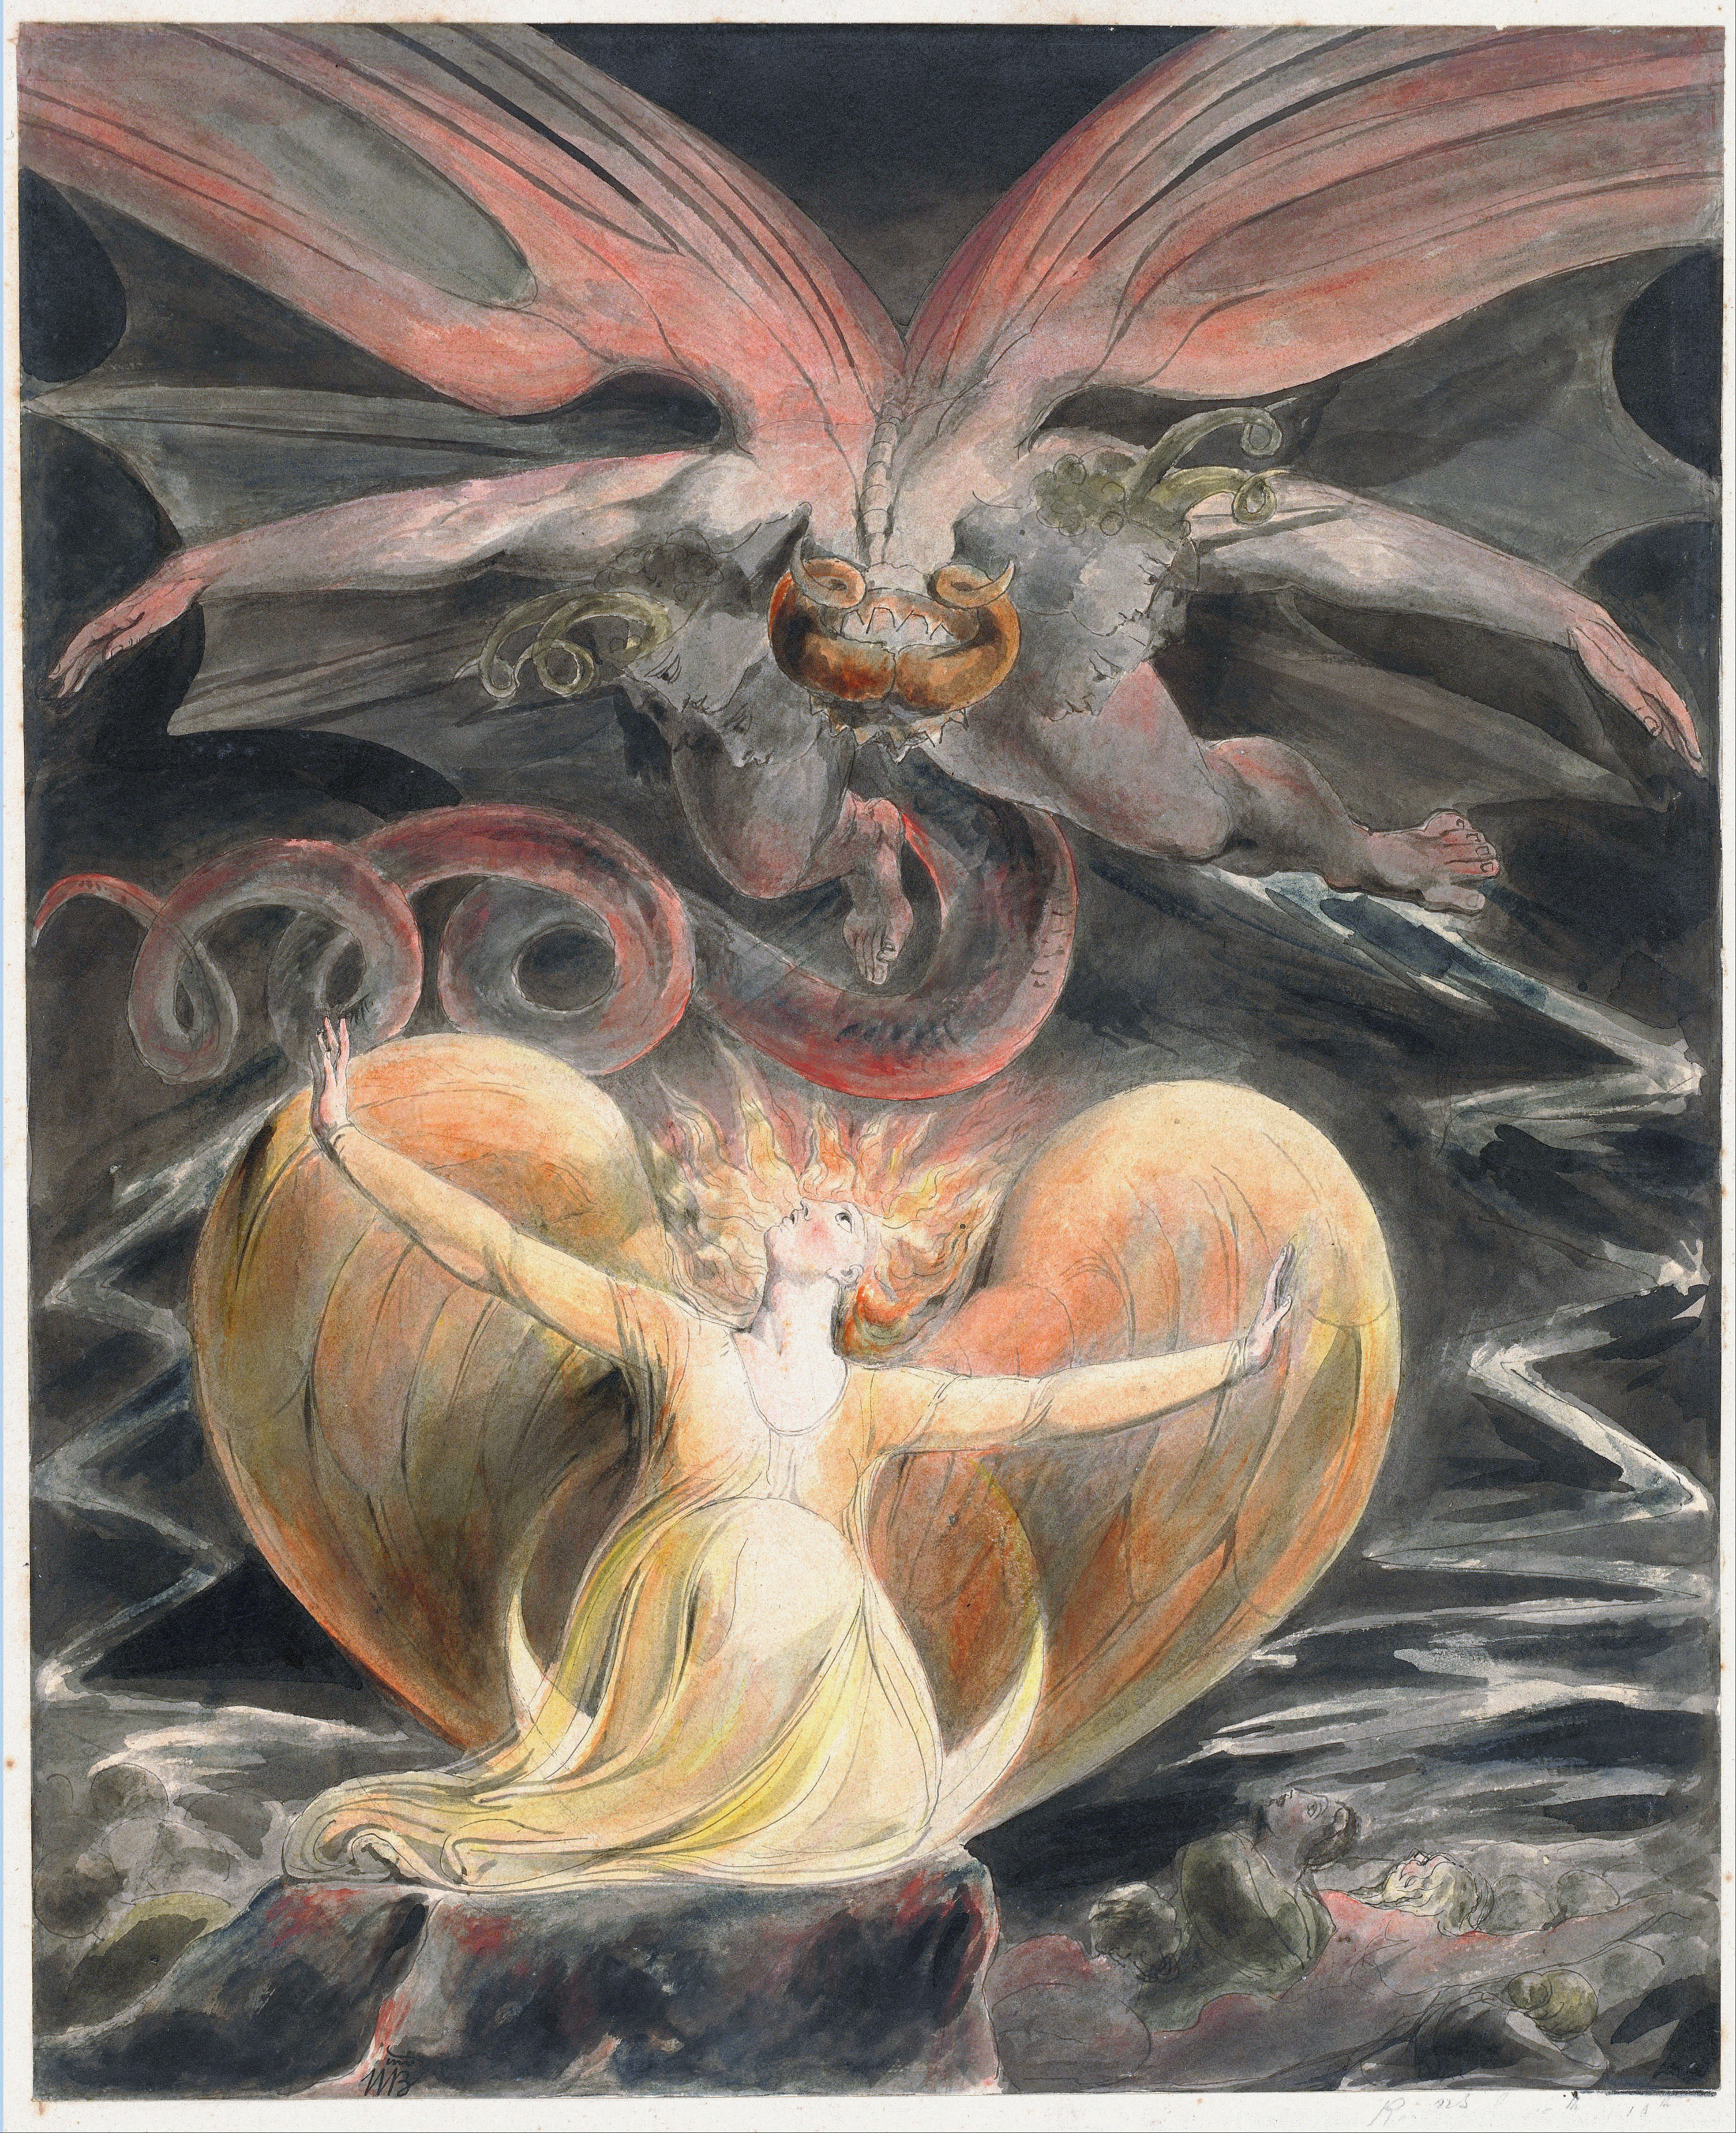 File:William Blake - The Great Red Dragon and the Woman Clothed with the Sun - Google Art ProjectFXD.jpg - Wikimedia Commons